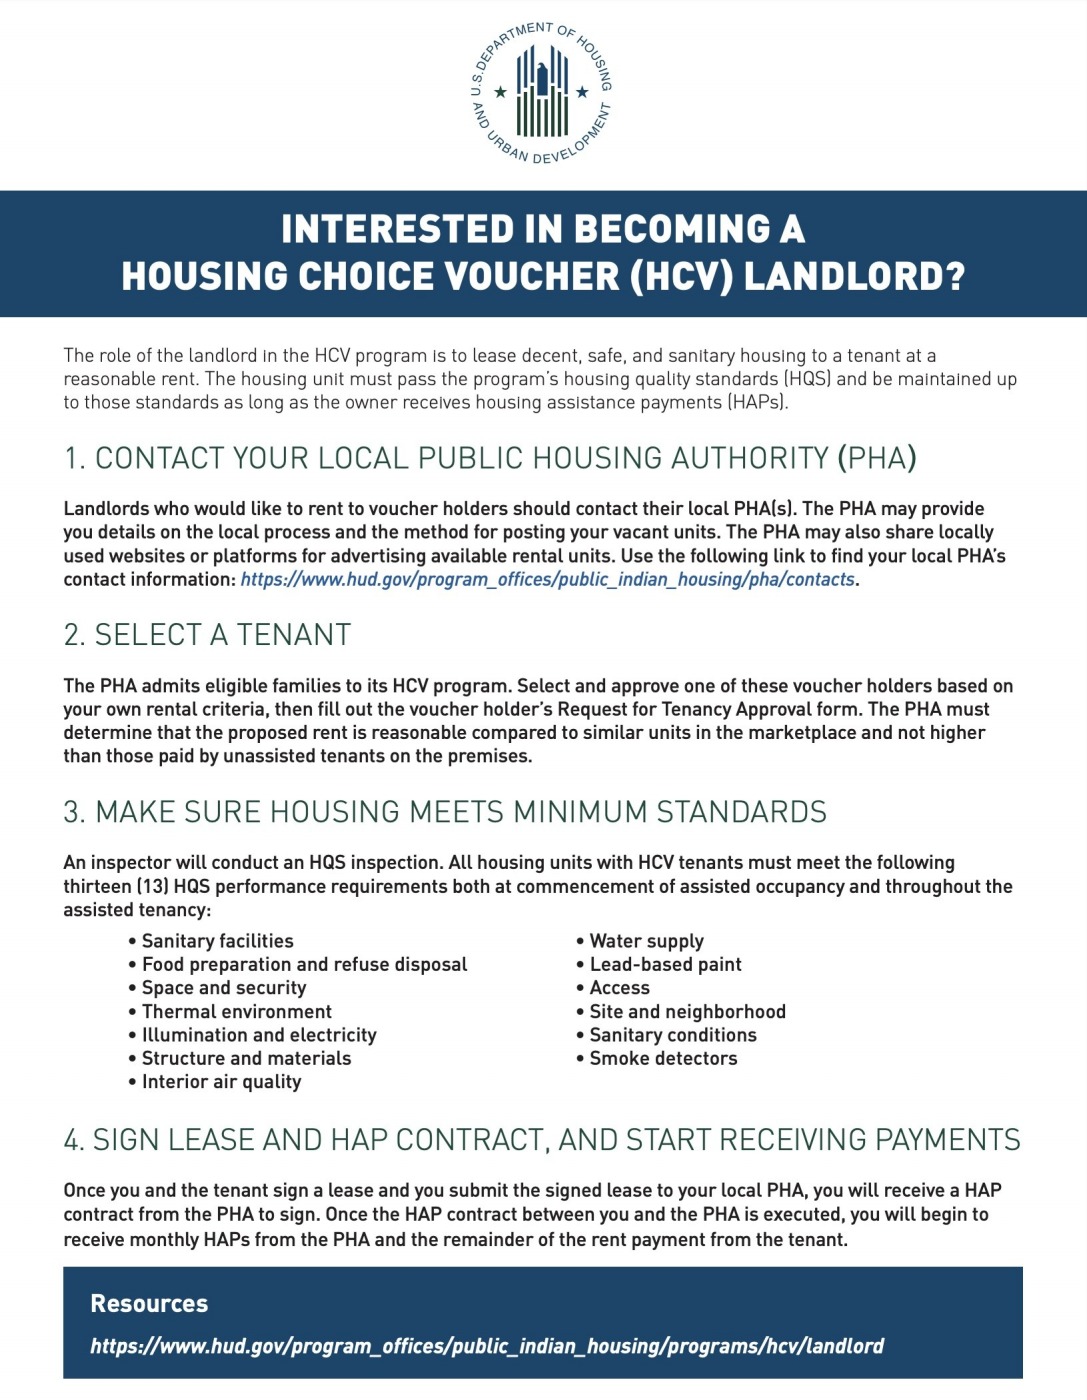 Interested in Becoming a HCV Landlord?